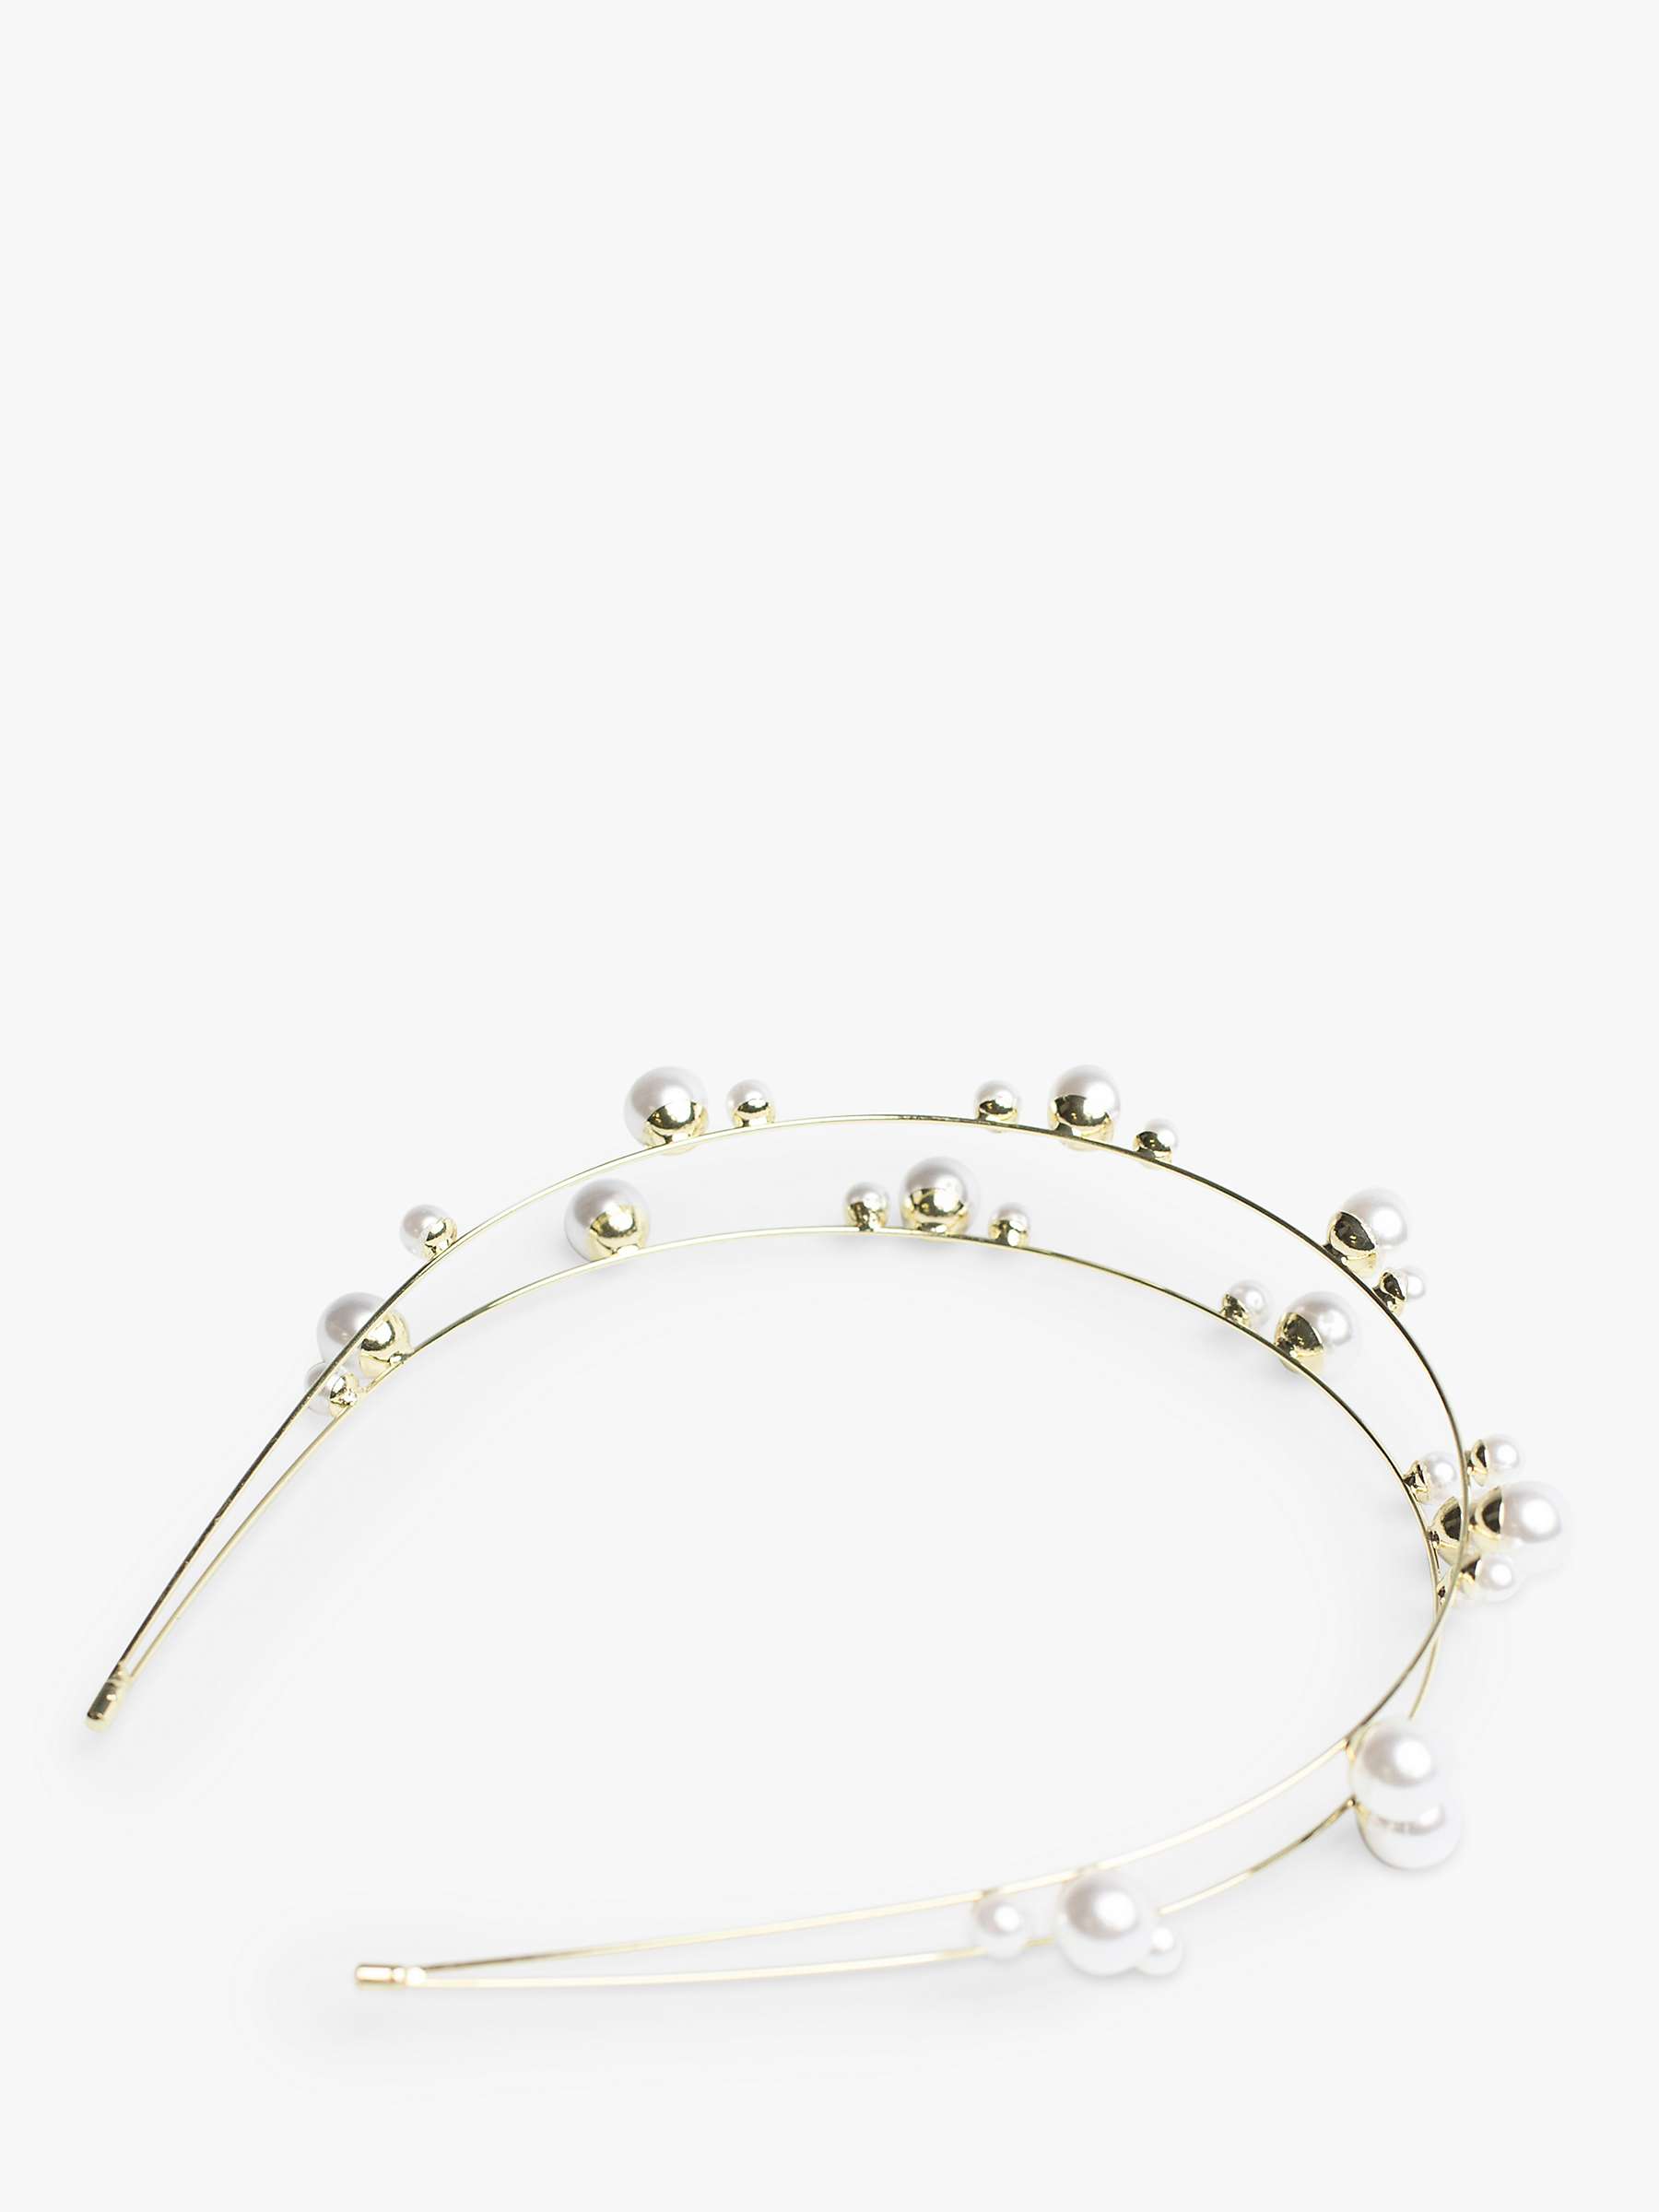 Buy Bloom & Bay Lavender Double Row Pearl Headband, Gold/Cream Online at johnlewis.com